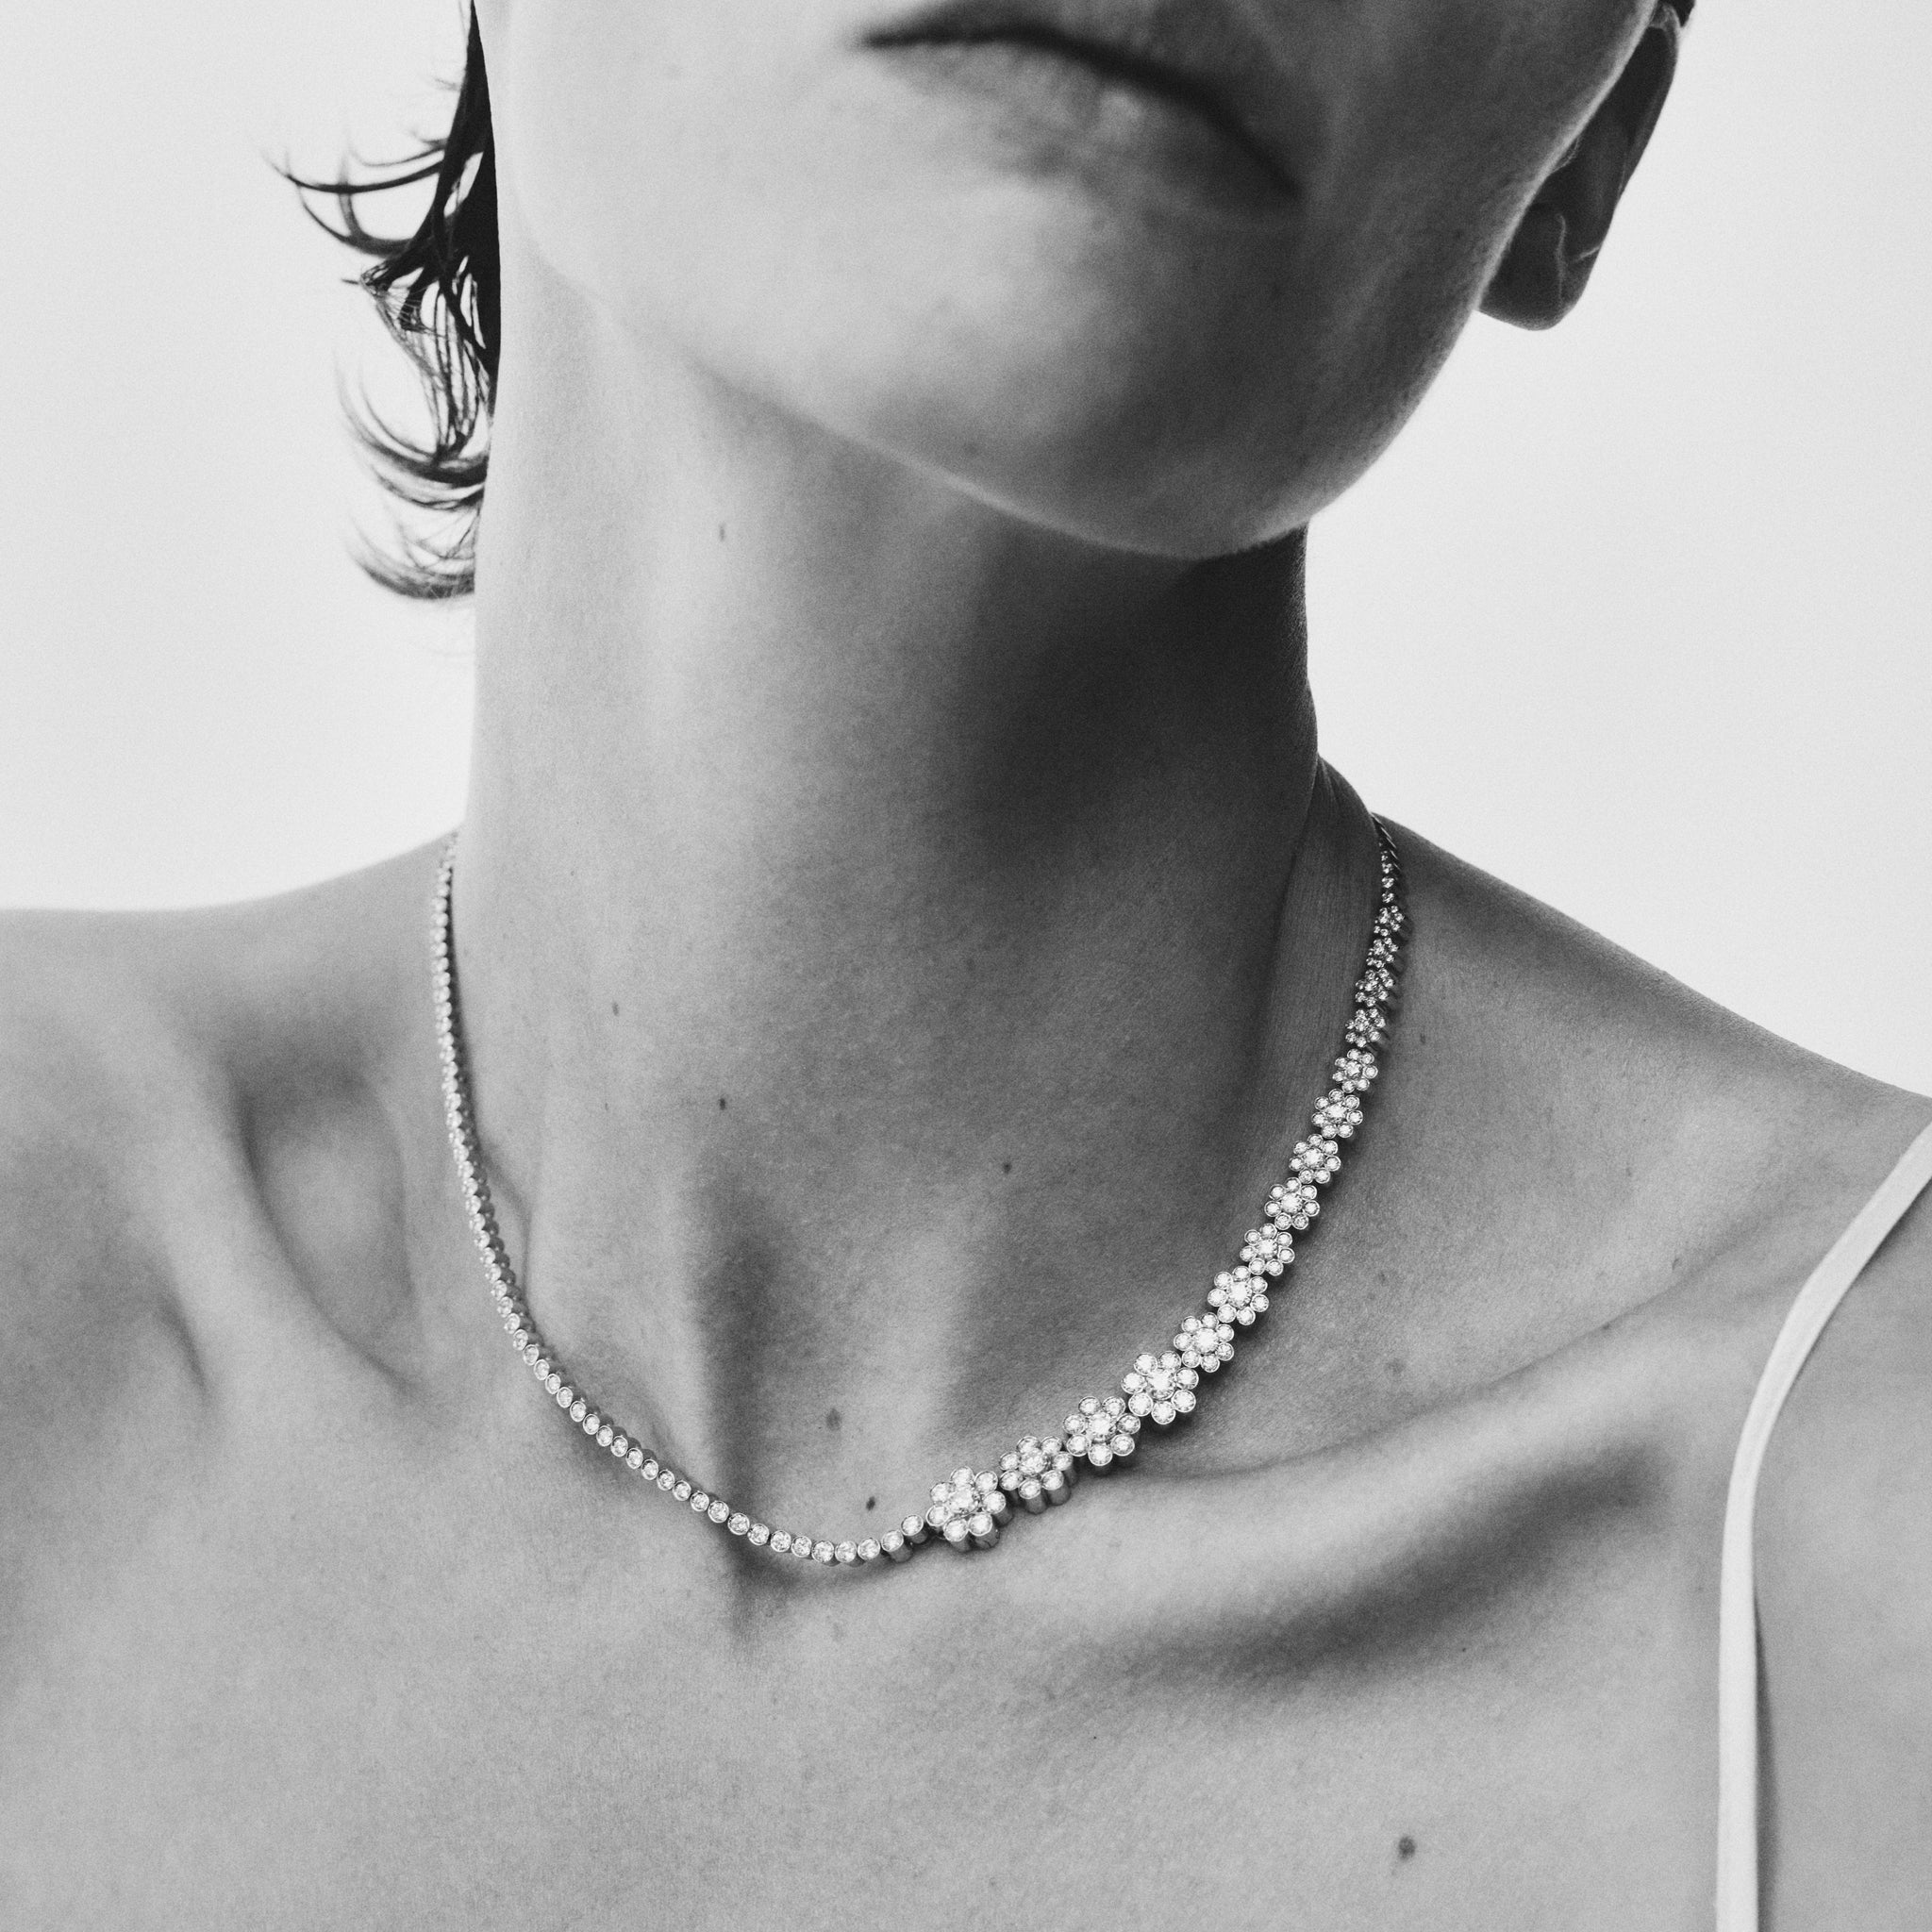 Model wearing Fleur de Tennis necklace. Crafted in 18K yellow gold with Top Wesselton VVS diamonds. 